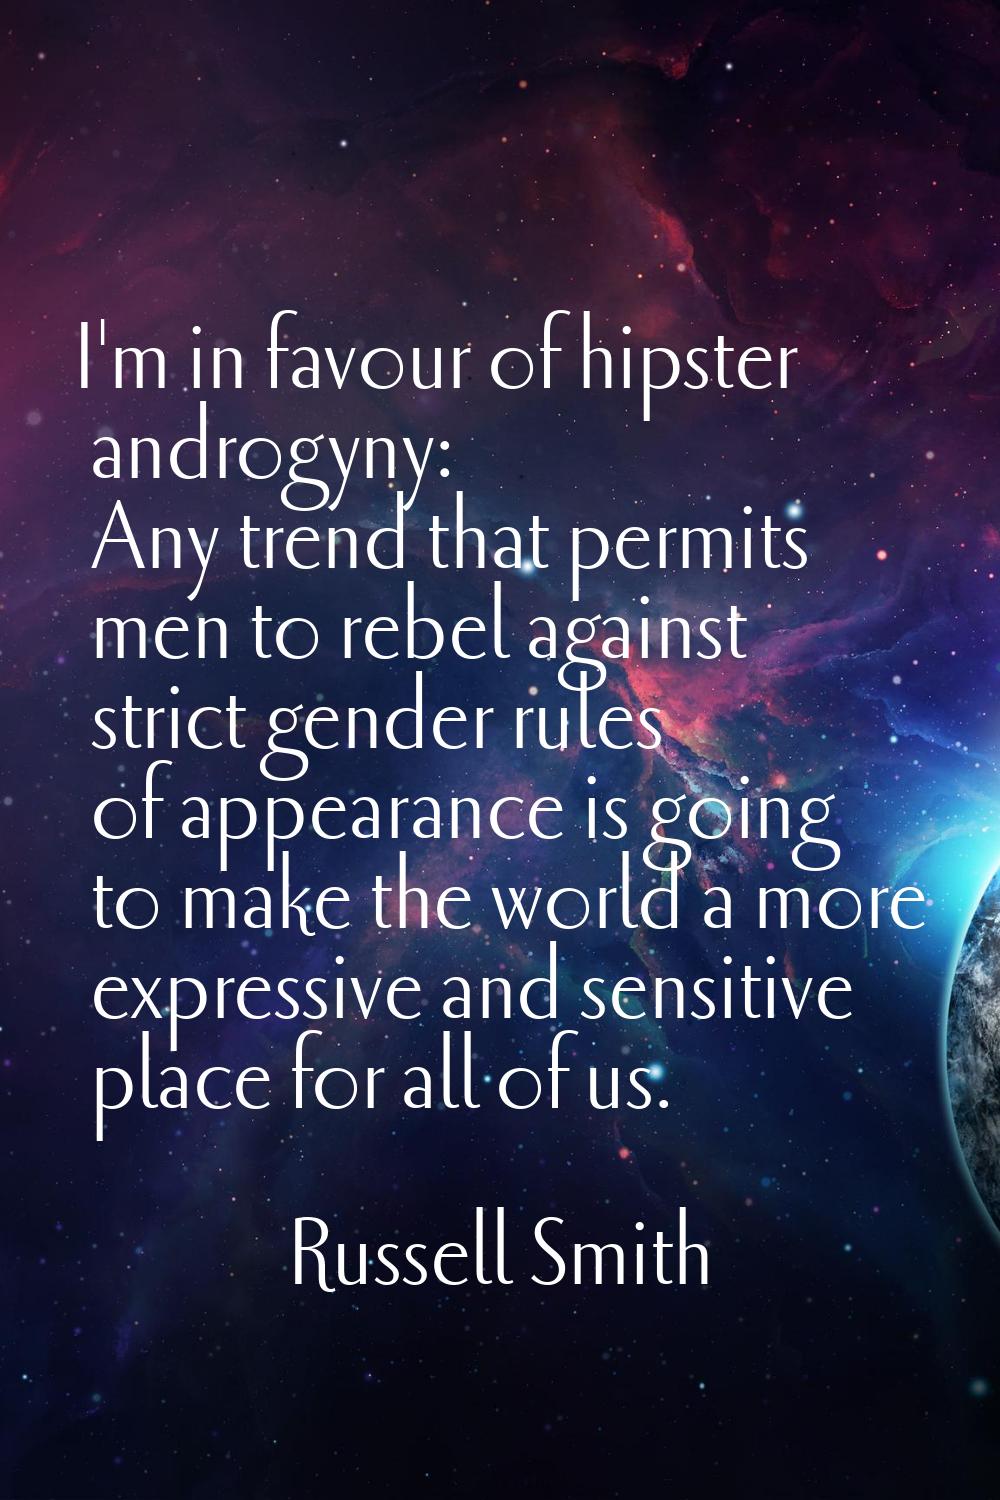 I'm in favour of hipster androgyny: Any trend that permits men to rebel against strict gender rules